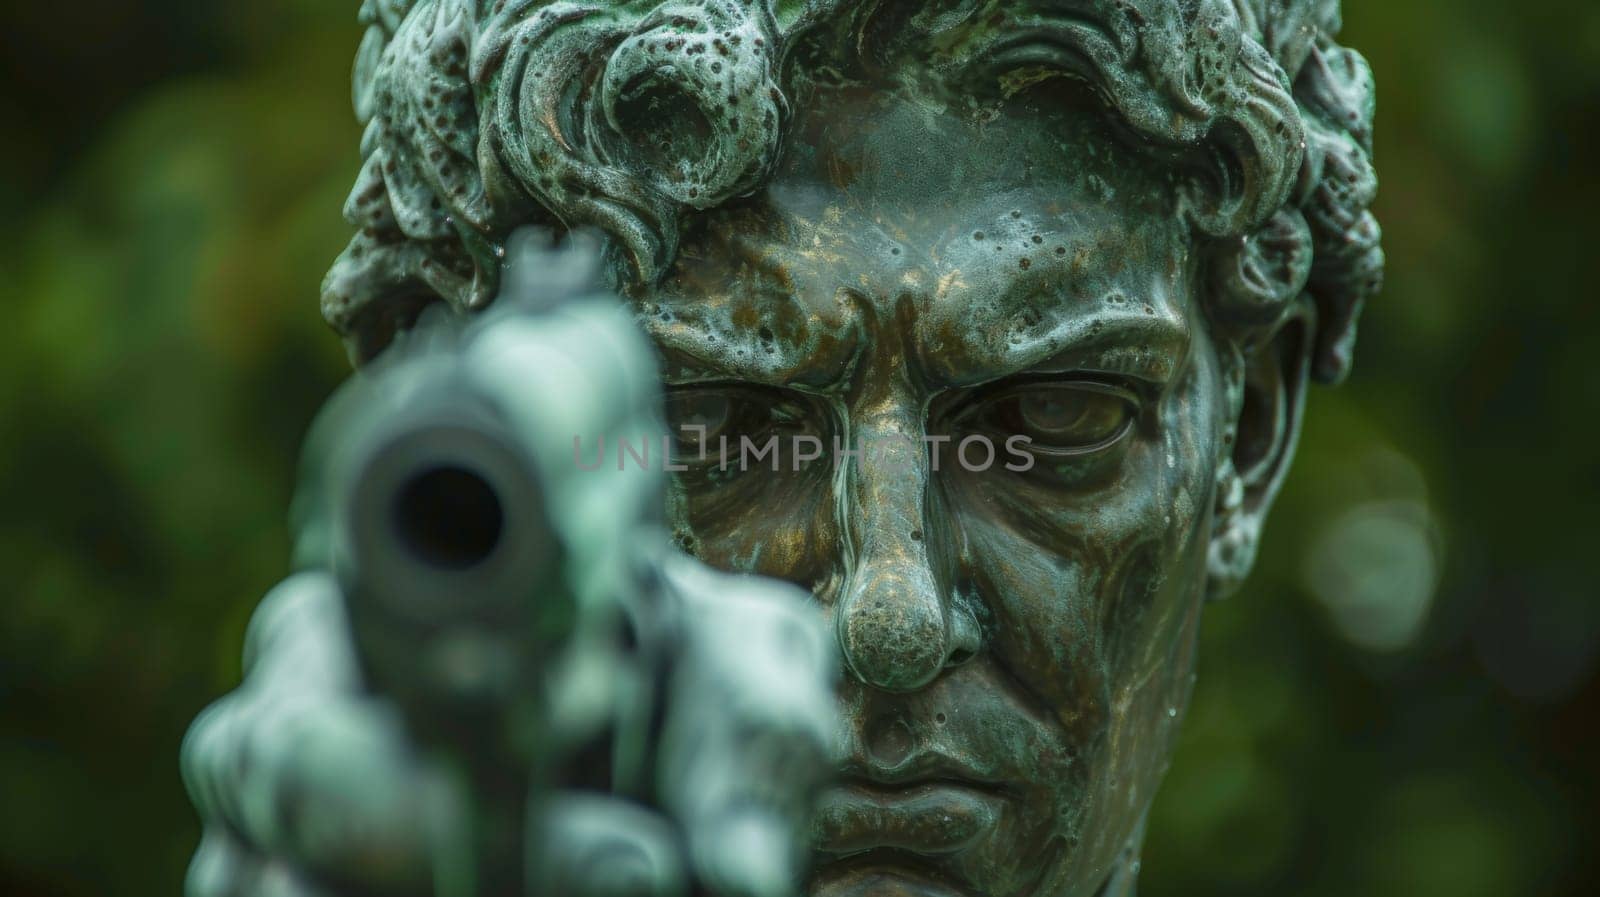 A statue of a man holding up his gun with the head